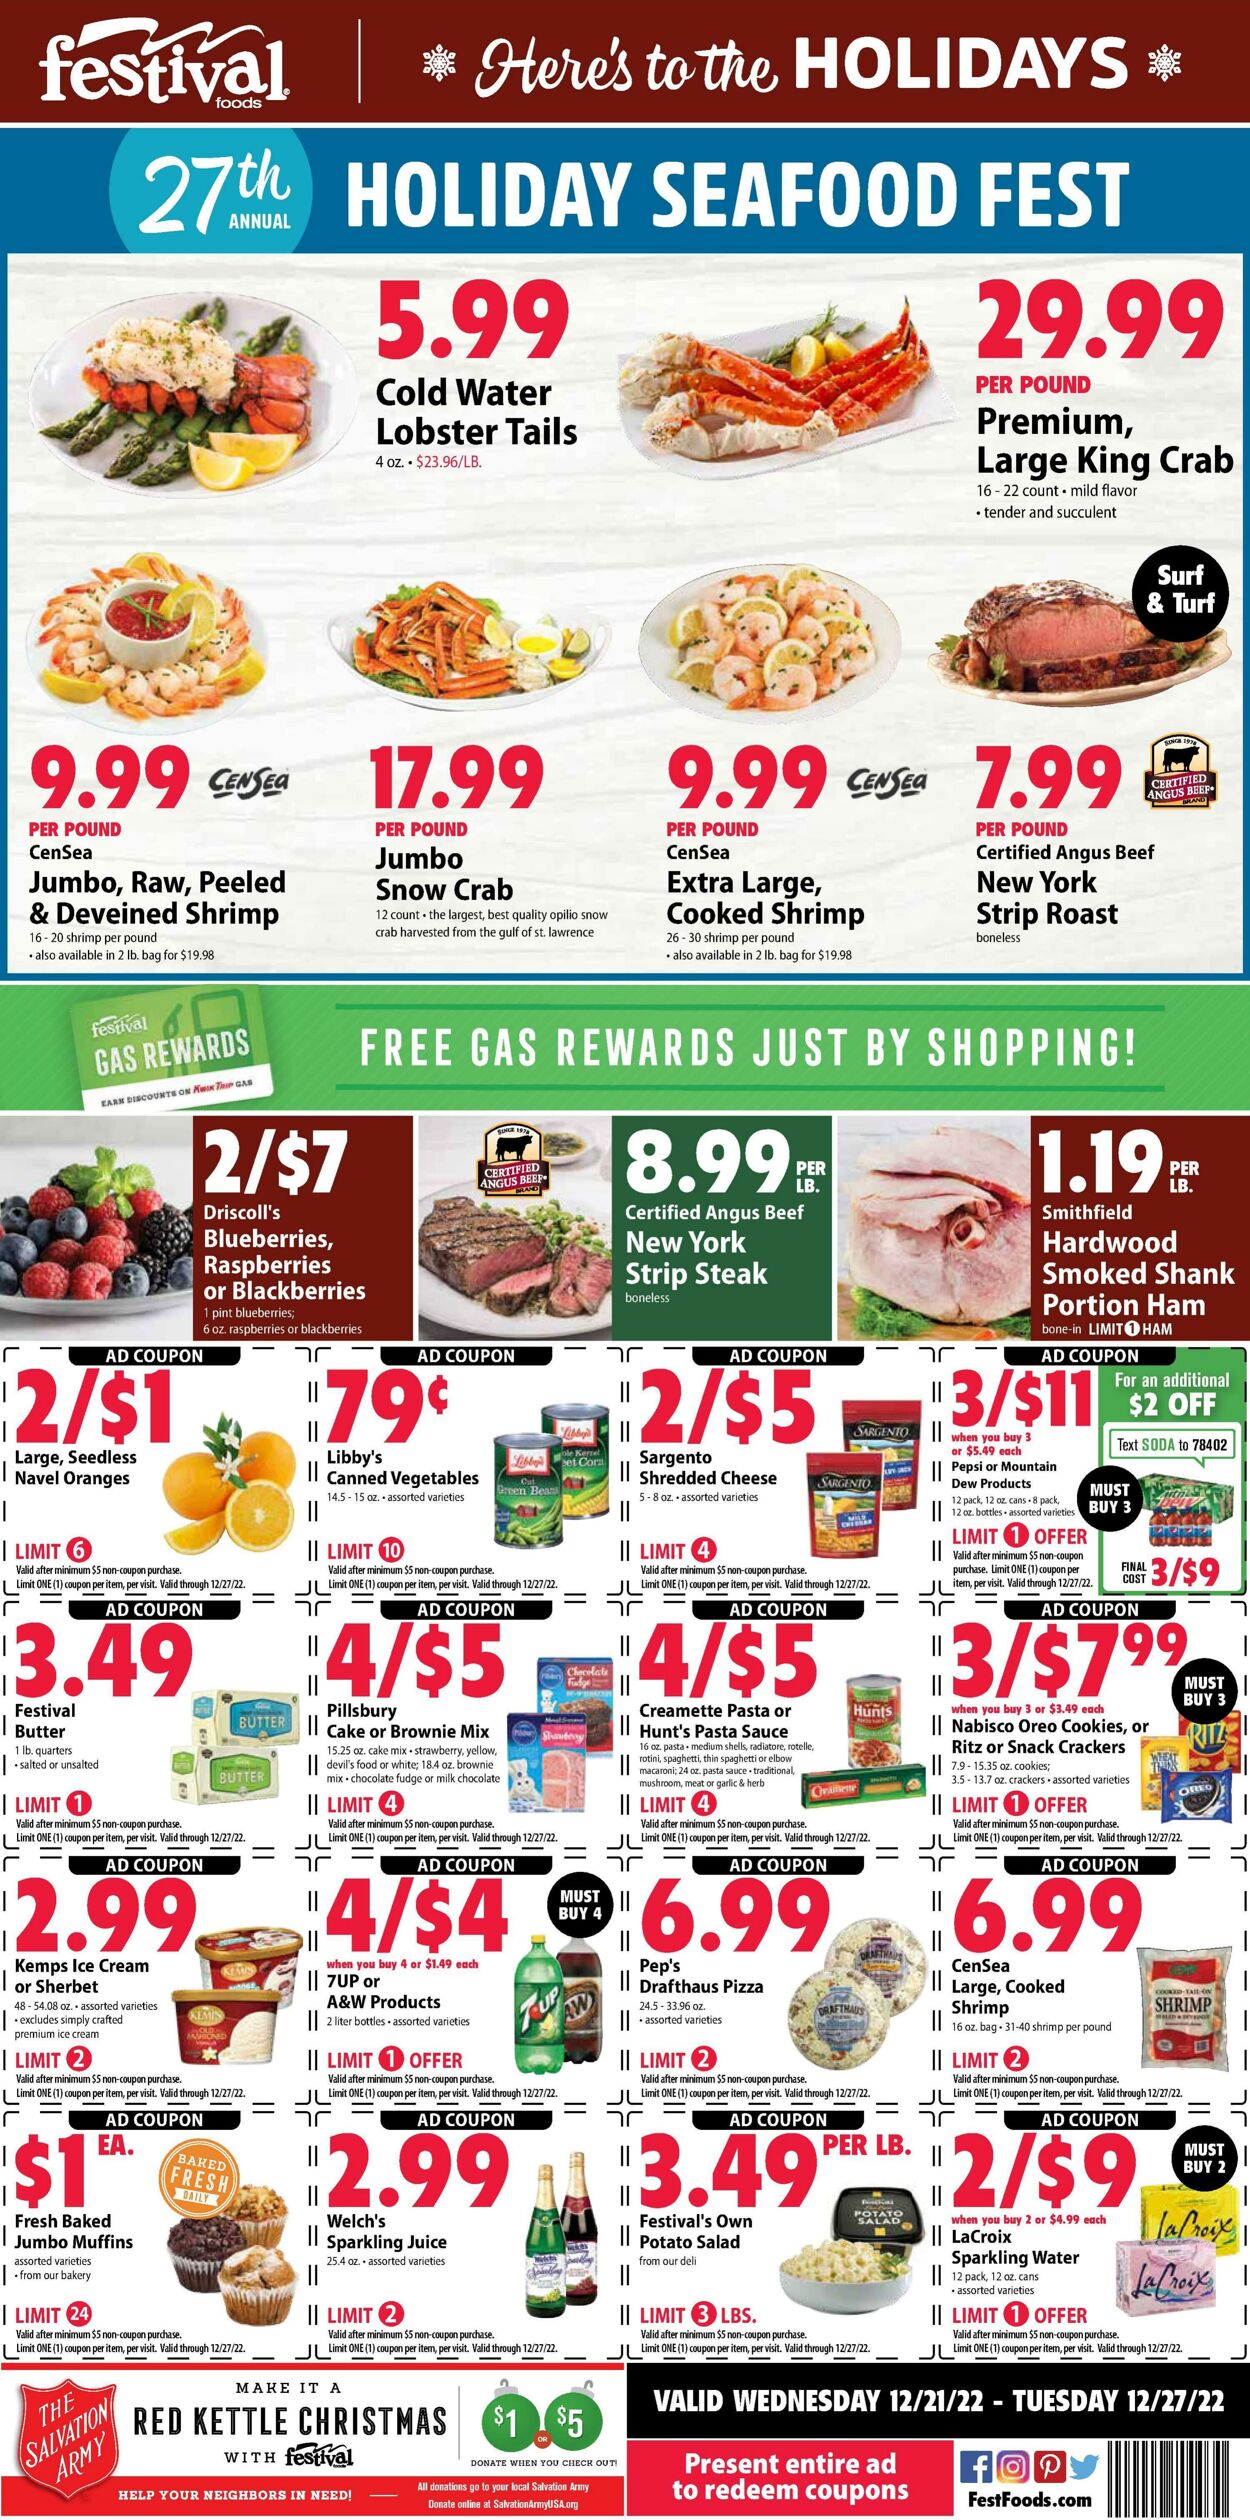 Festival Foods Current weekly ad 01/10 Weekly Ads, Promotions